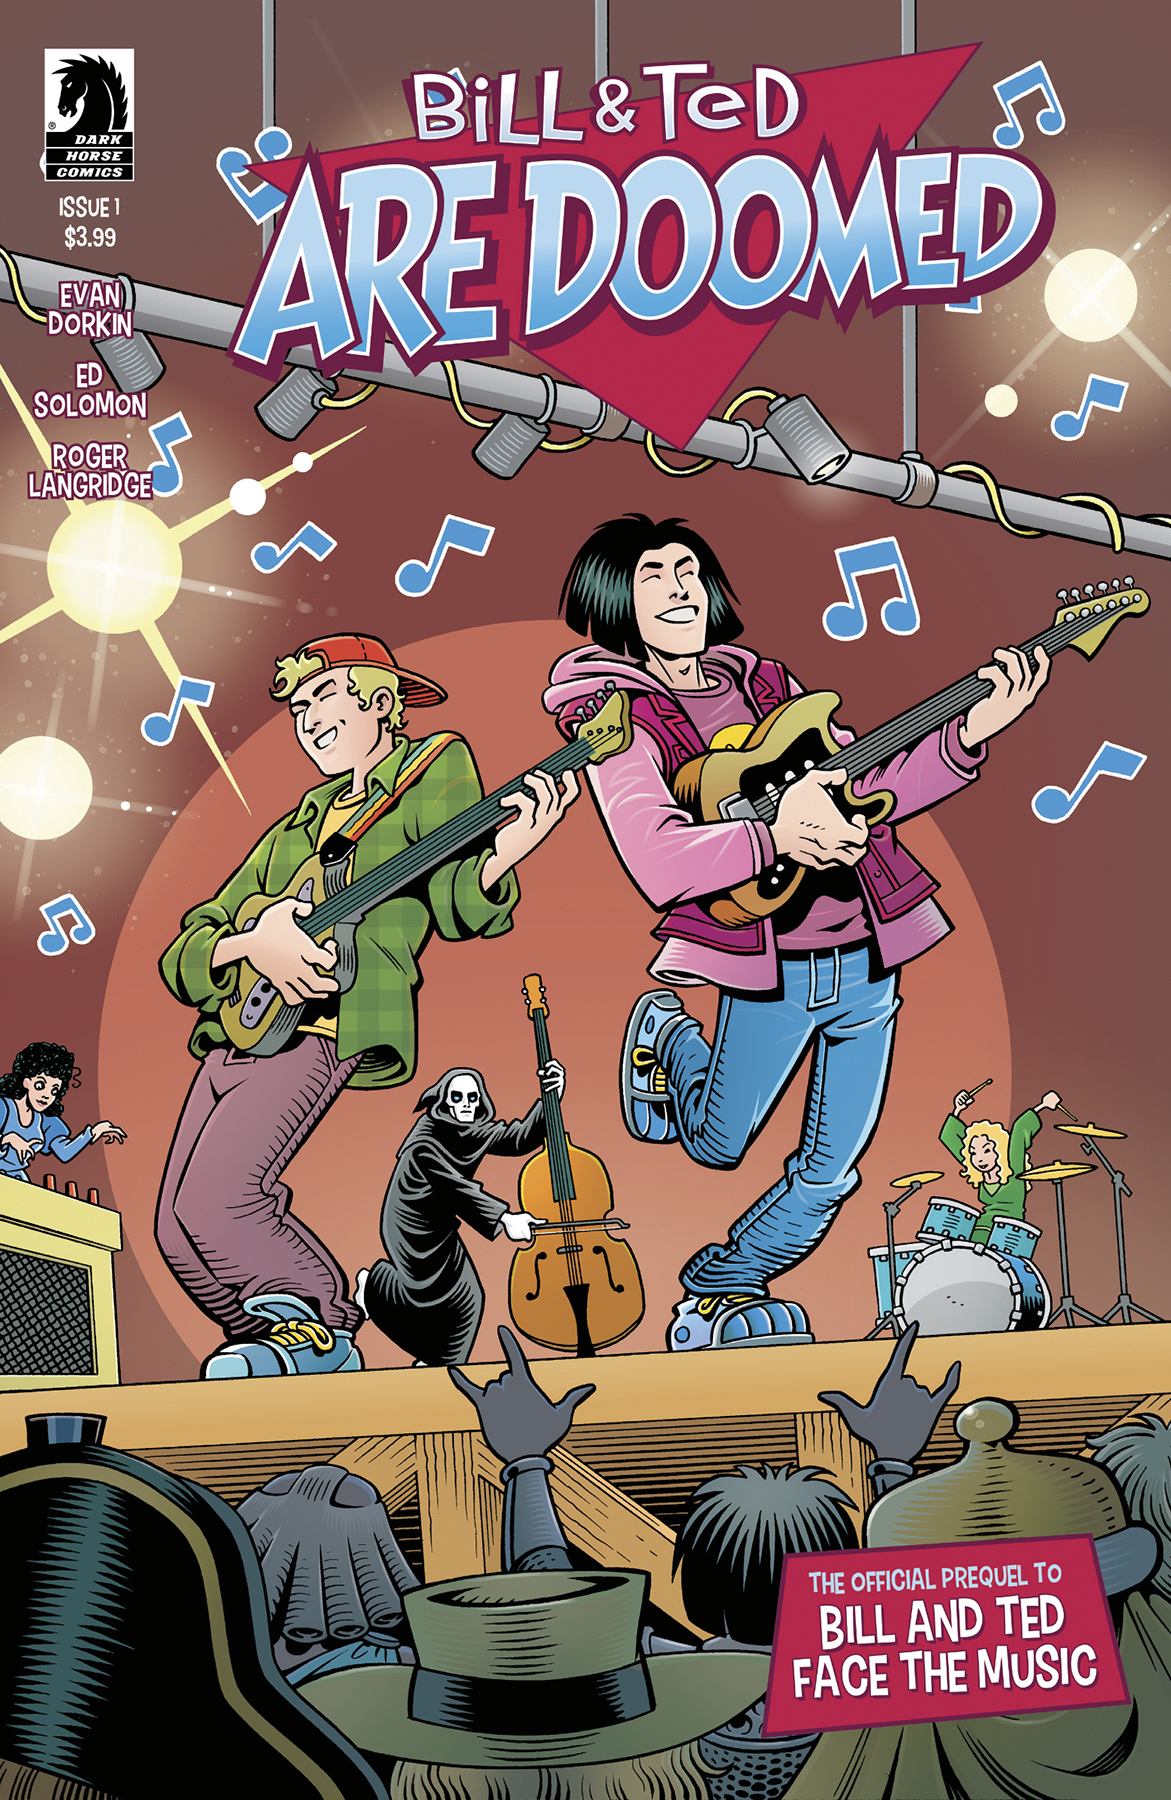 Bill & Ted Are Doomed #1 Cover B Langridge (Of 4)